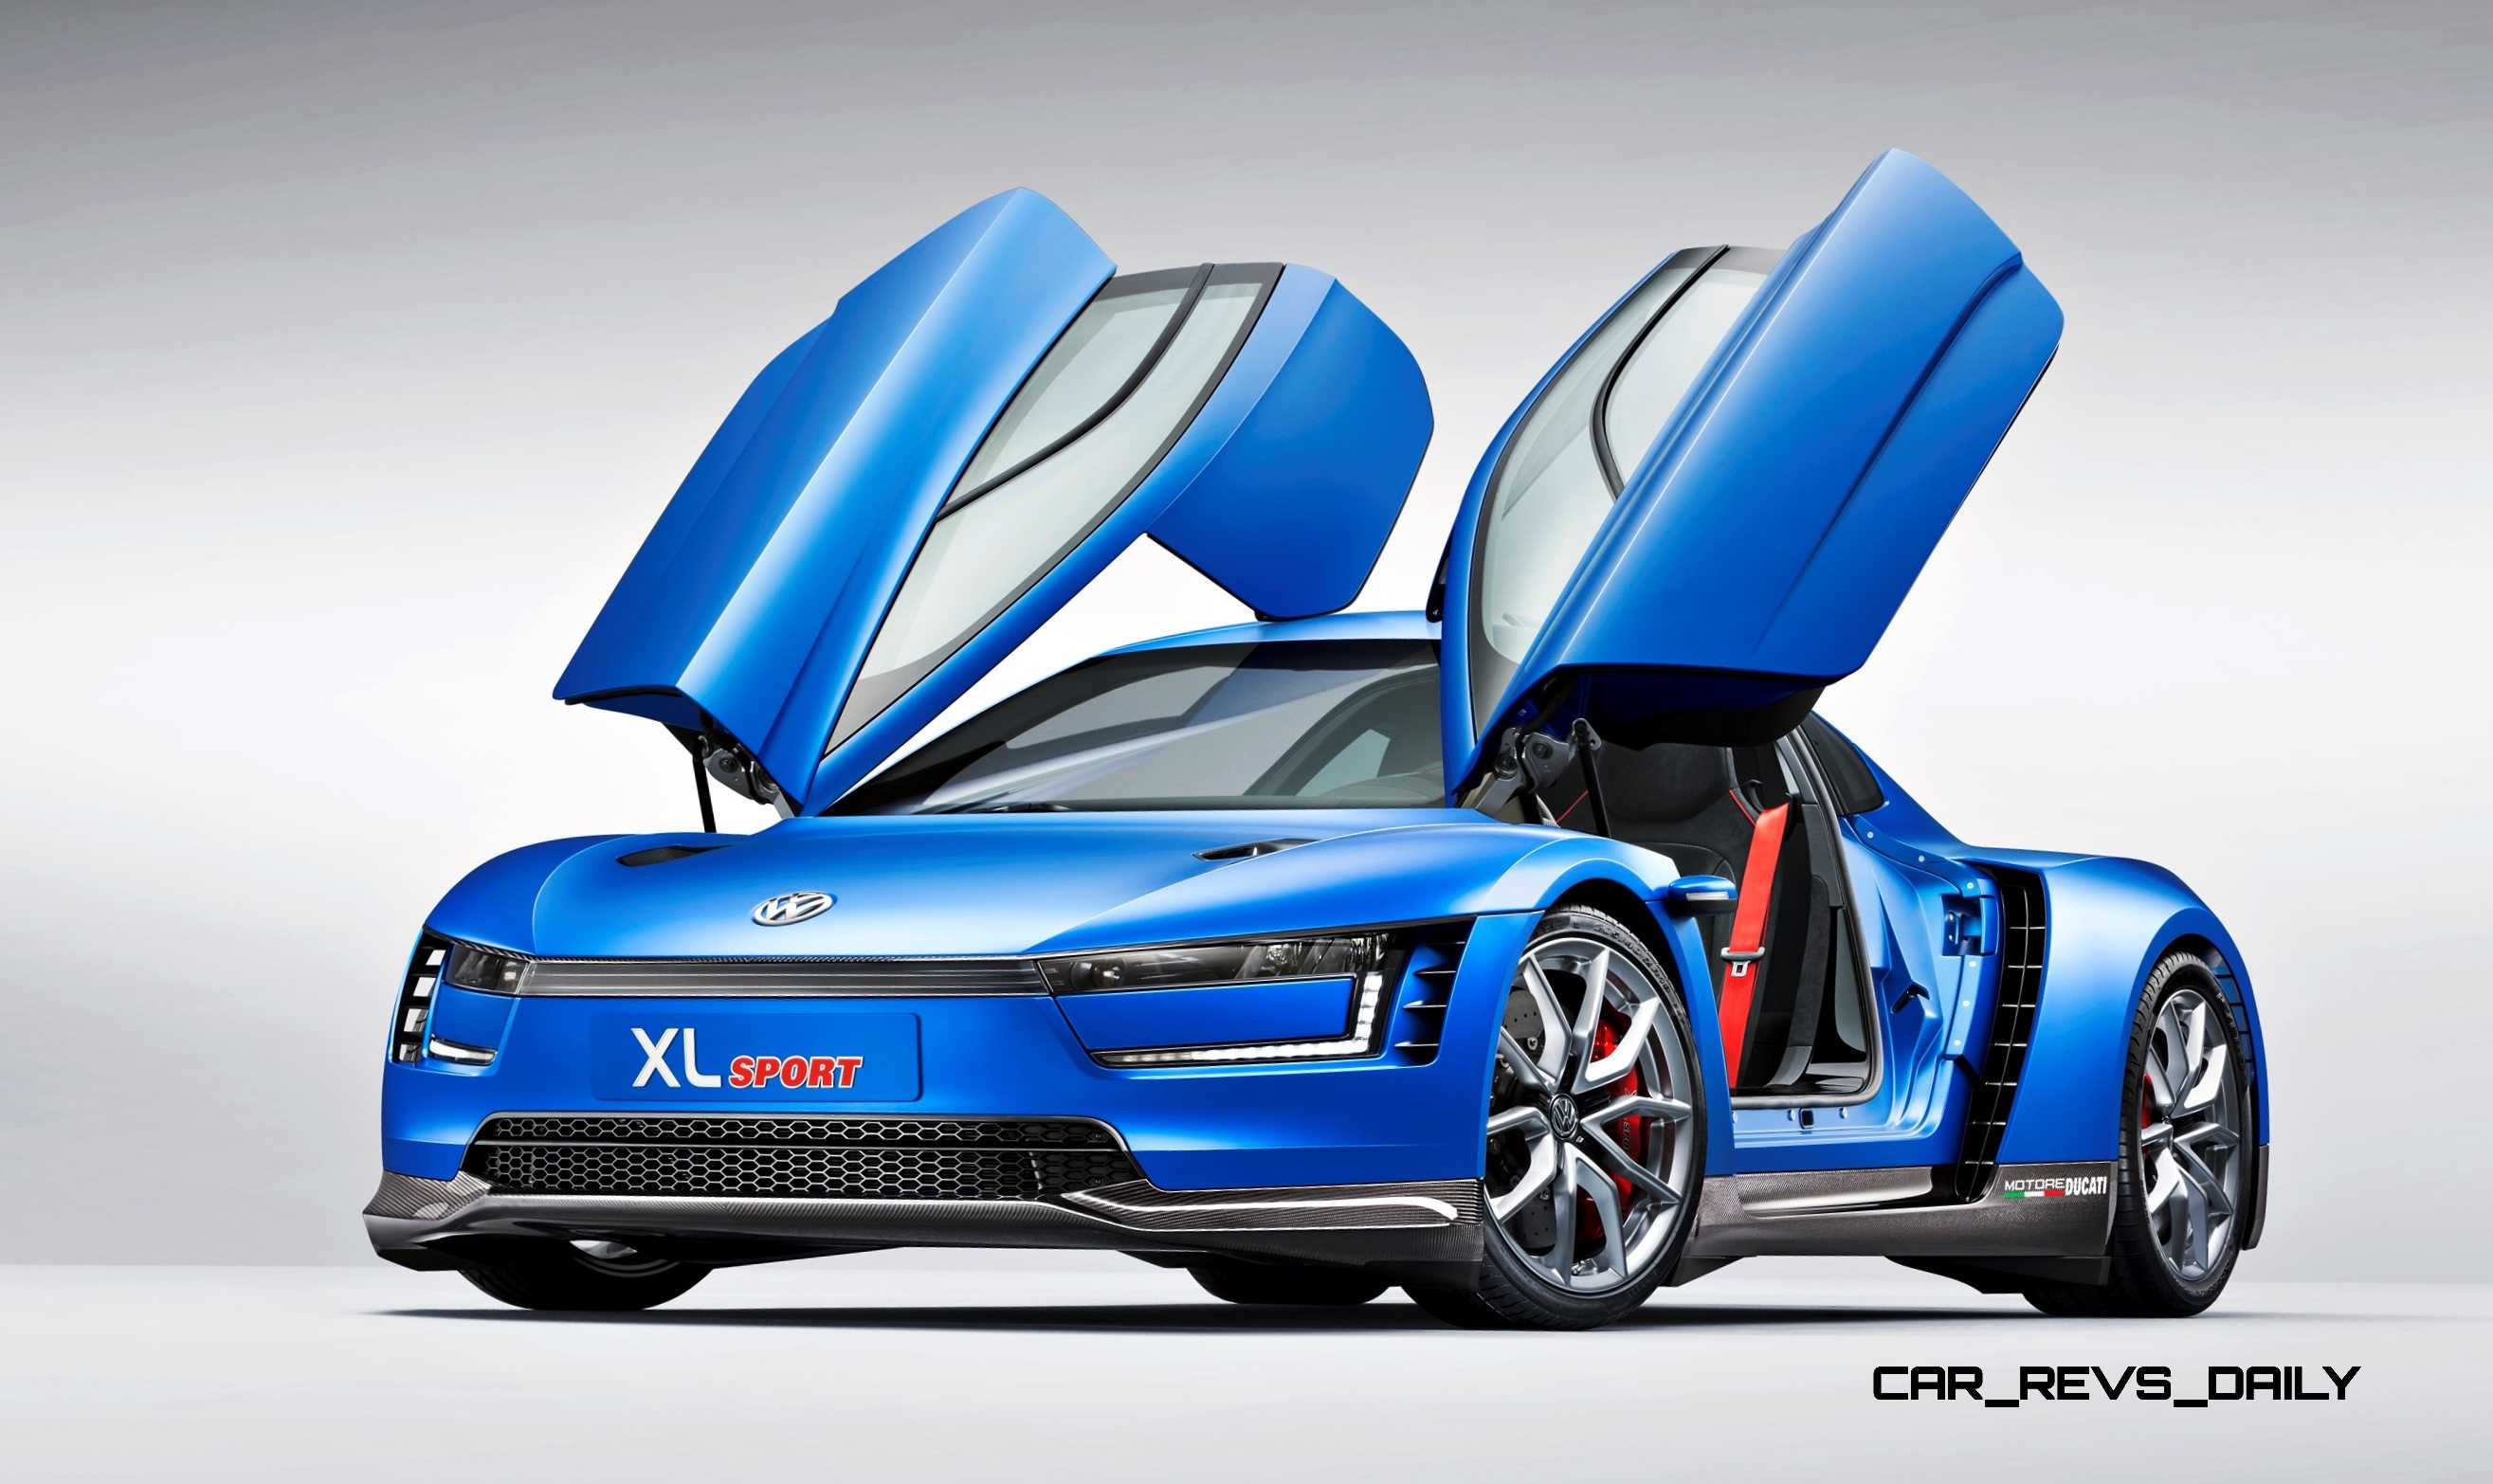 2014 Volkswagen XL Sport Concept Makes One Seriously Sexy BMW i8 Competitor
